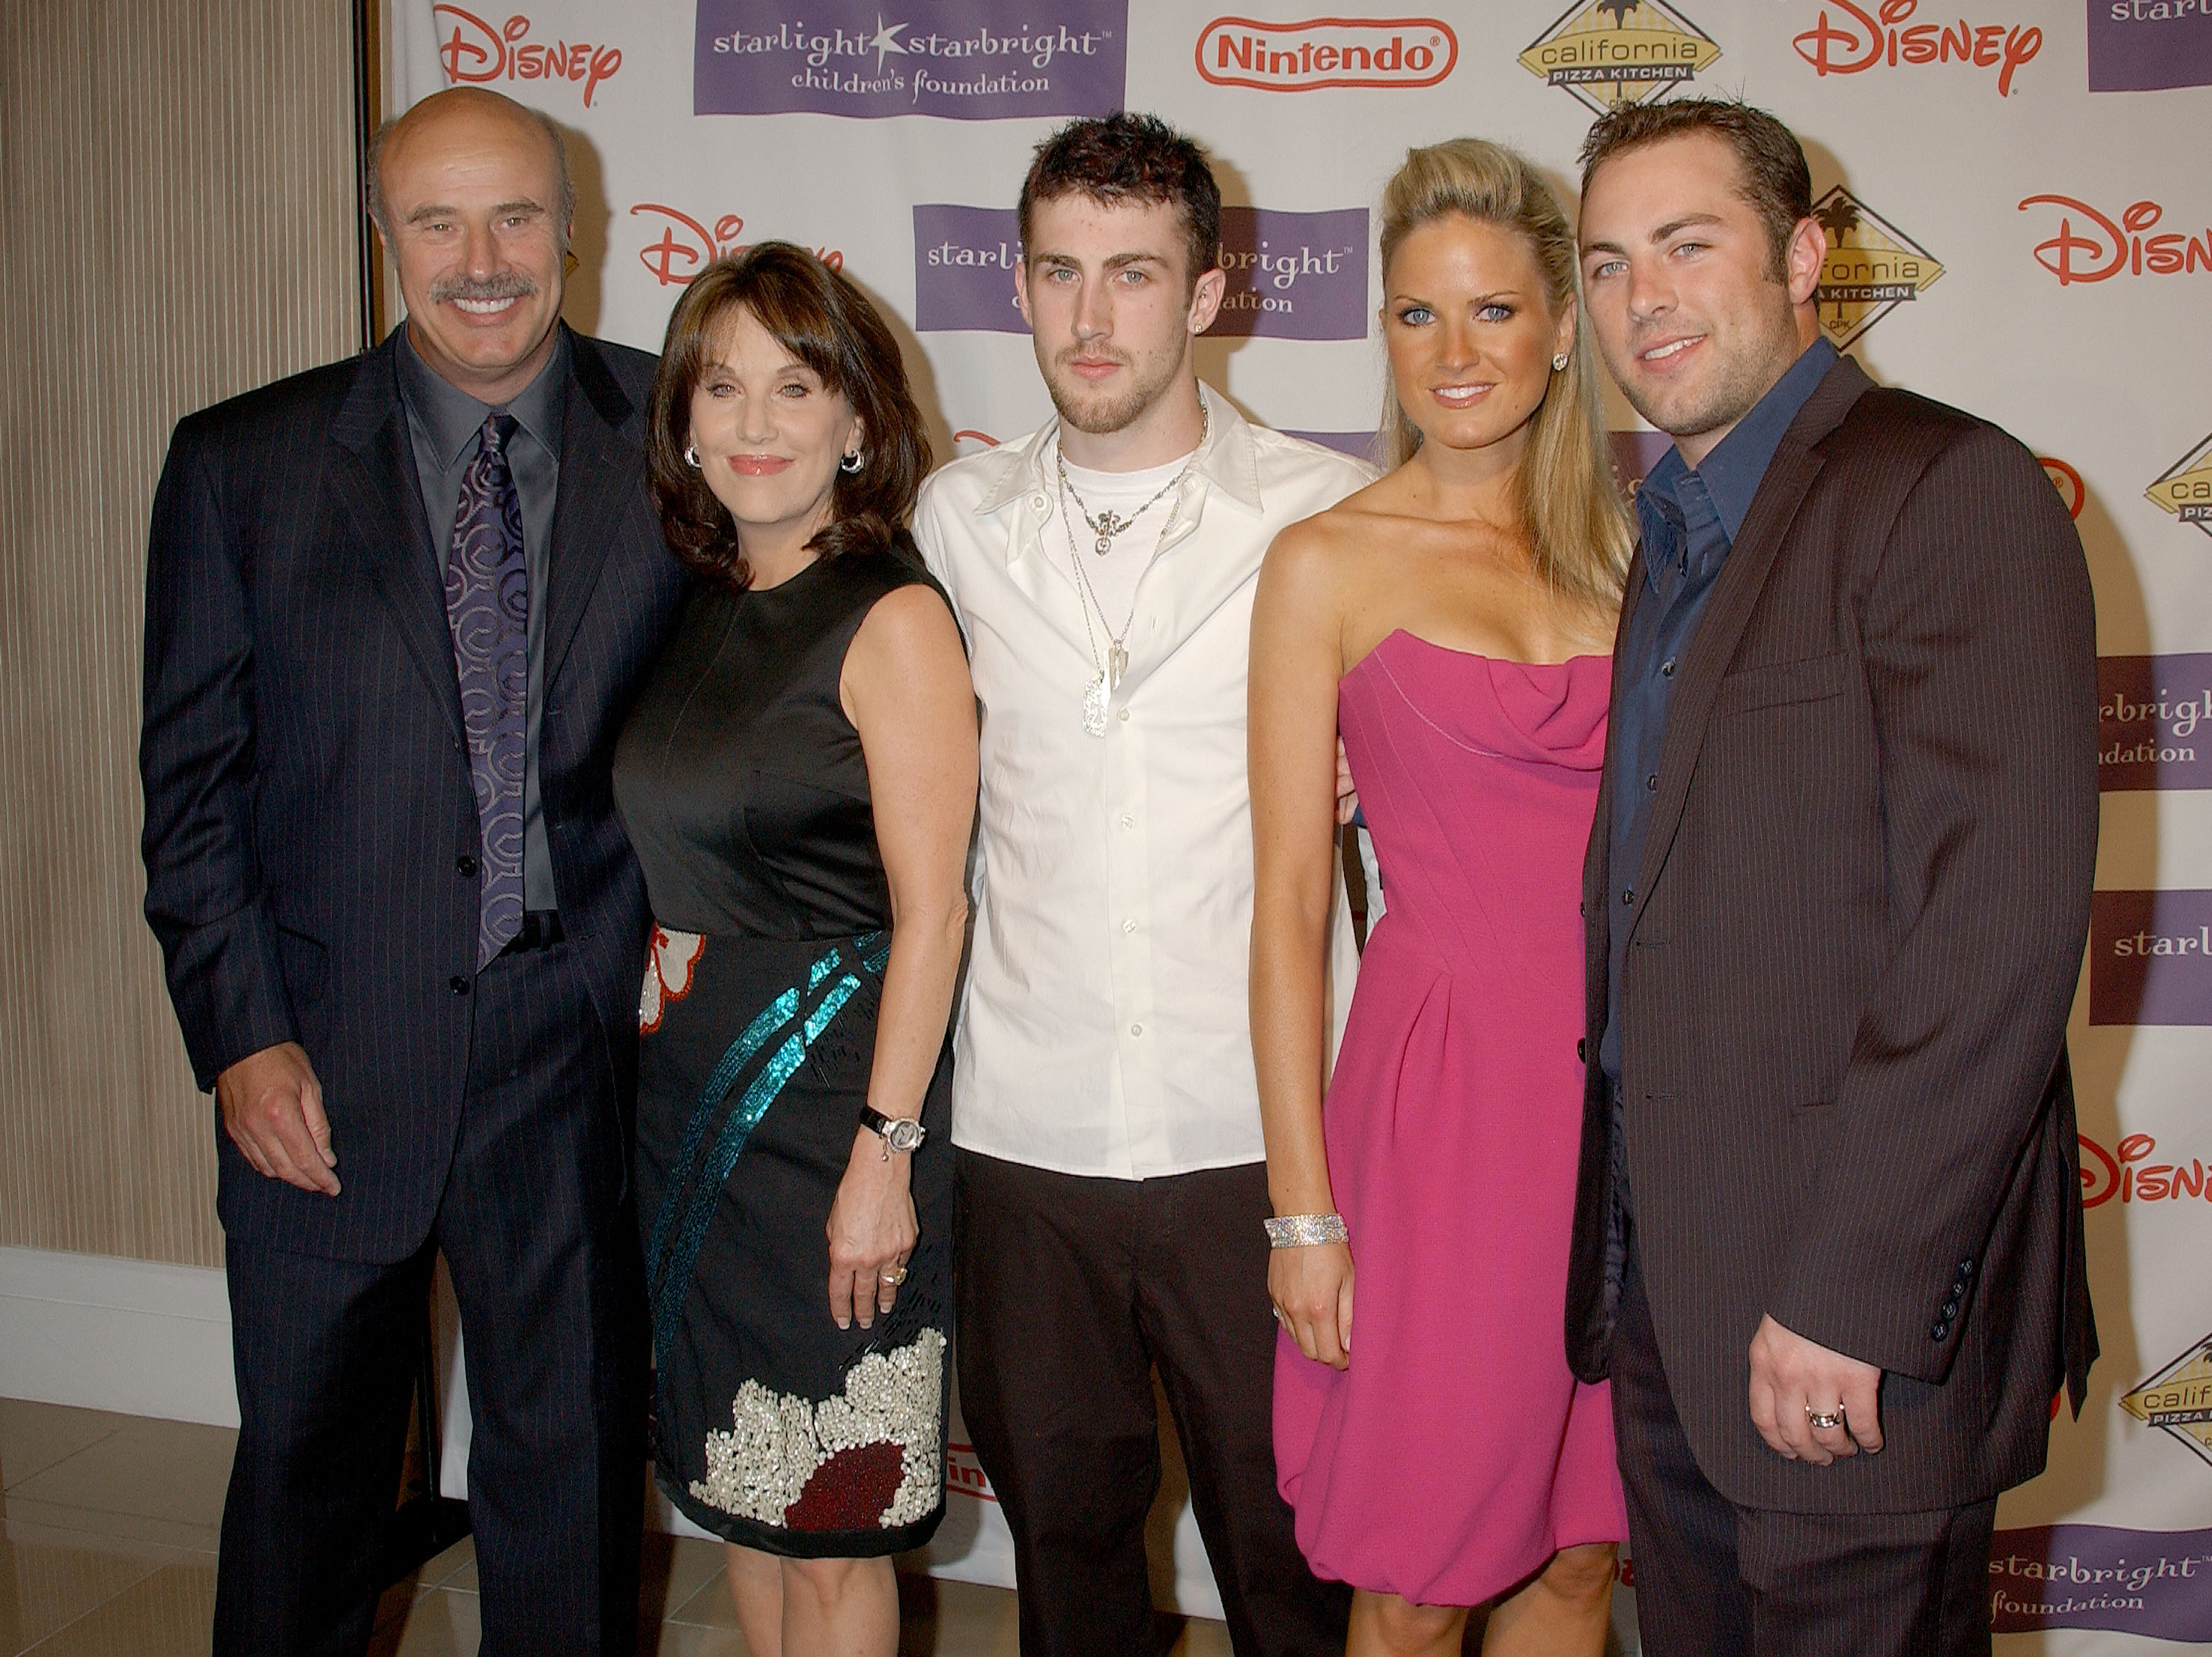 Dr. Phil McGraw, Robin McGraw, Jordan McGraw, Erica Dahm, and Jay McGraw at the Starlight Starbright Children's Foundation Gala on March 23, 2007. | Source: Getty Images